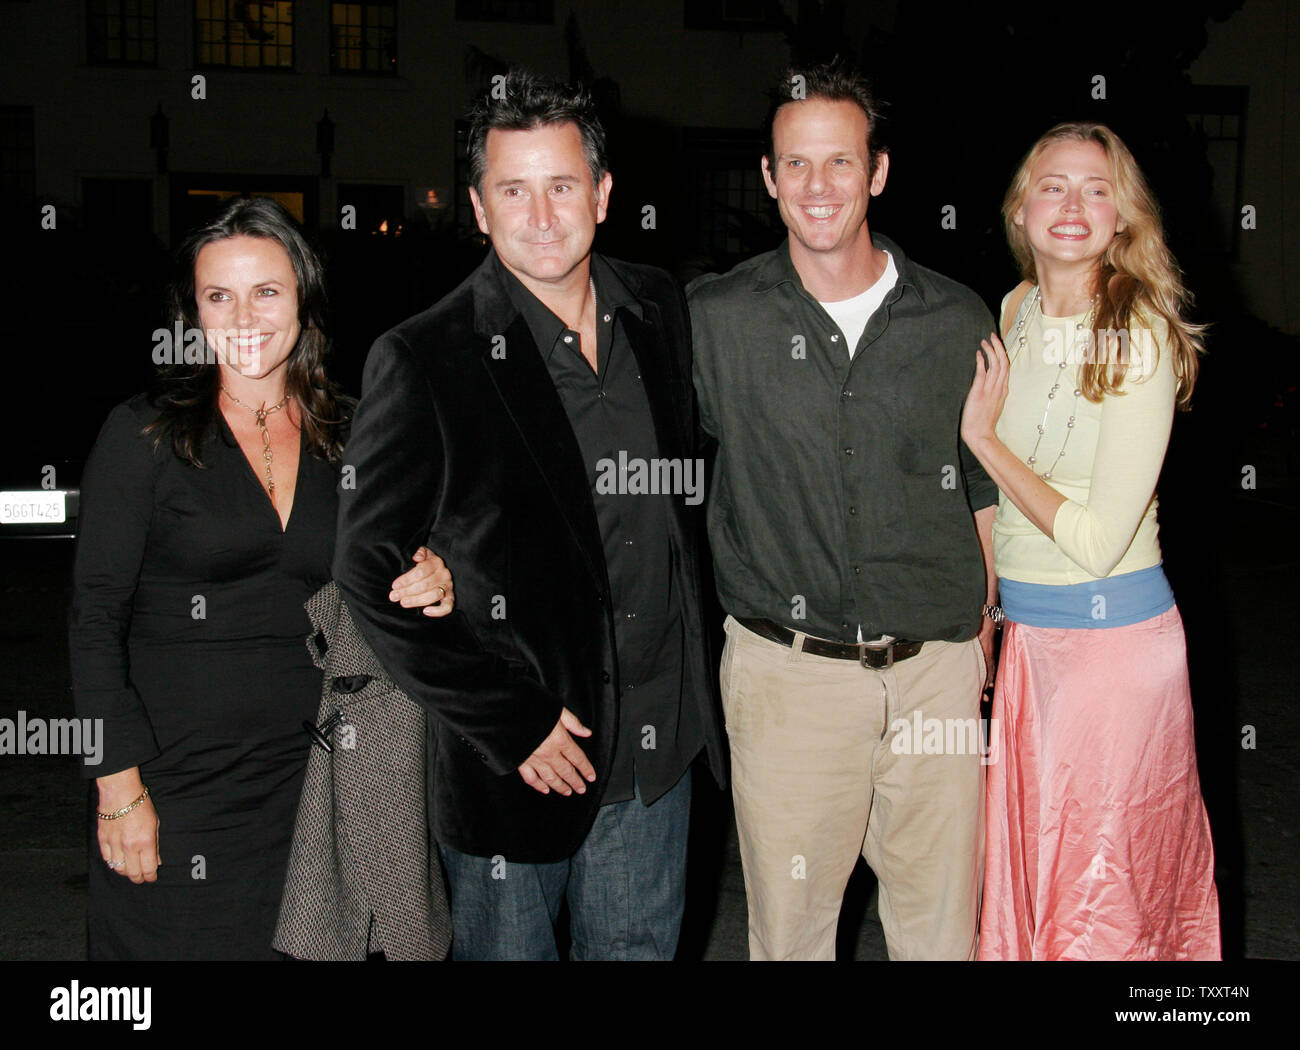 From left to right, actors Gia Carides, her husband, actor Anthony LaPaglia, actor/director Peter Berg, and actress Estella Warren arrive at the January 24, 2005 Los Angeles premiere of the film, ' Hide And Seek', at the Zanuck Theater. The film opens in the US on January 28. (UPI Photo/Francis Specker) Stock Photo